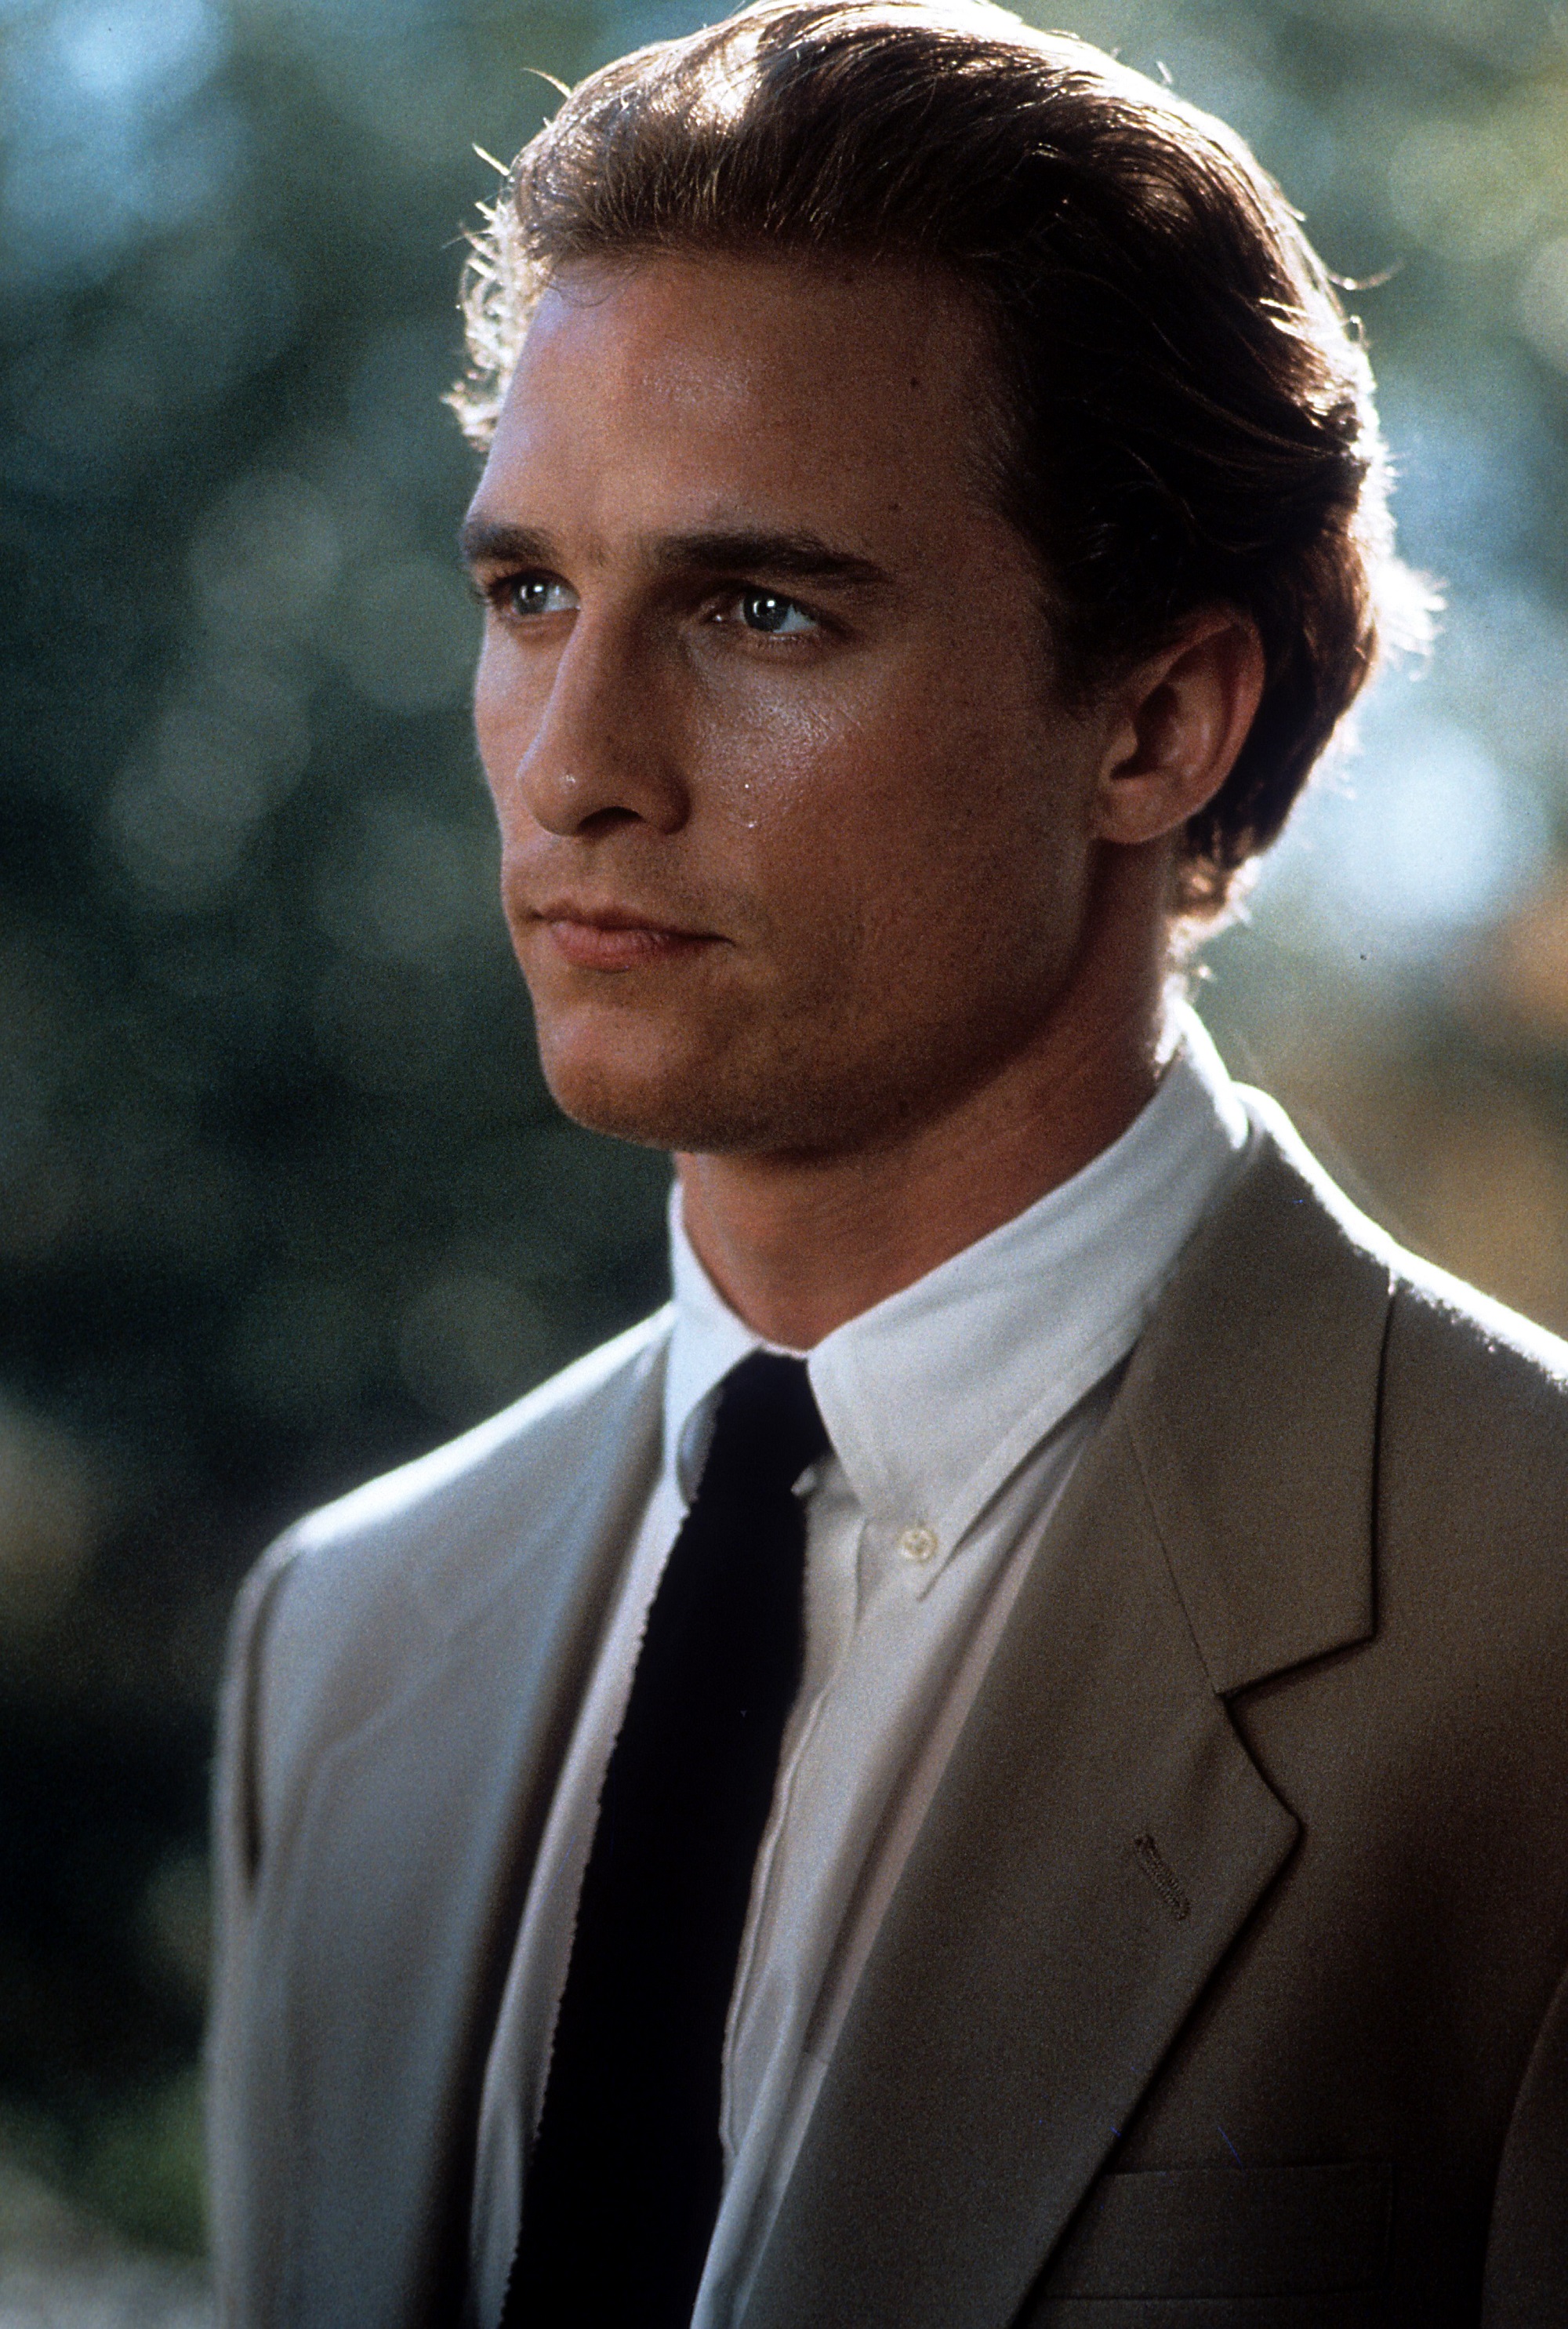 Matthew McConaughey as Jake Brigance in A Time to Kill